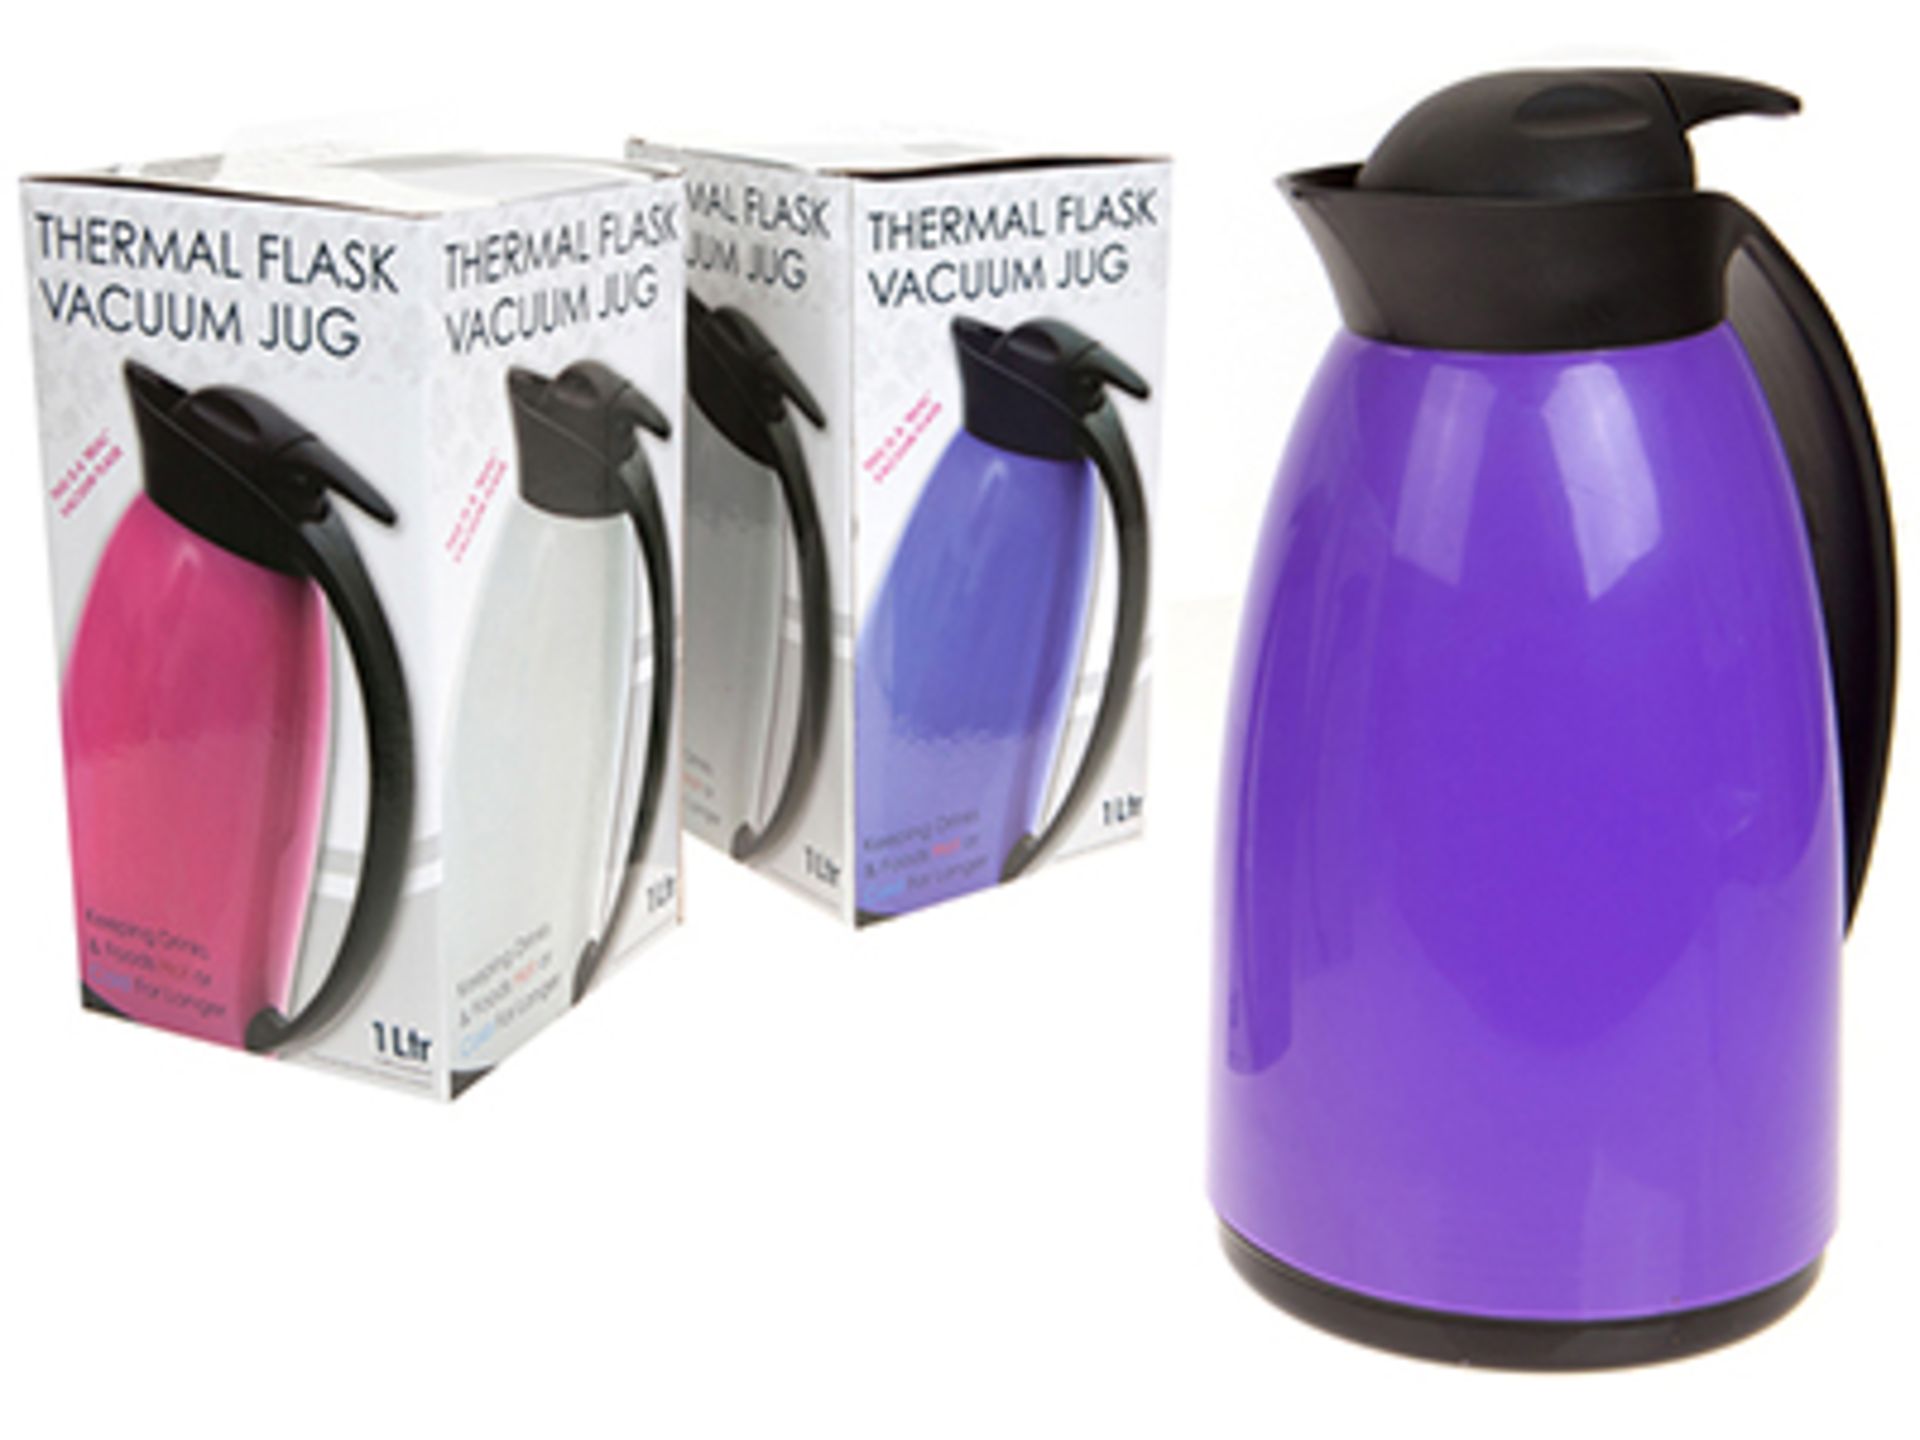 V Brand New Thermal Flask Vacuum Jug - 1 Litre - Quick Release Valve To Pour On The Go Without